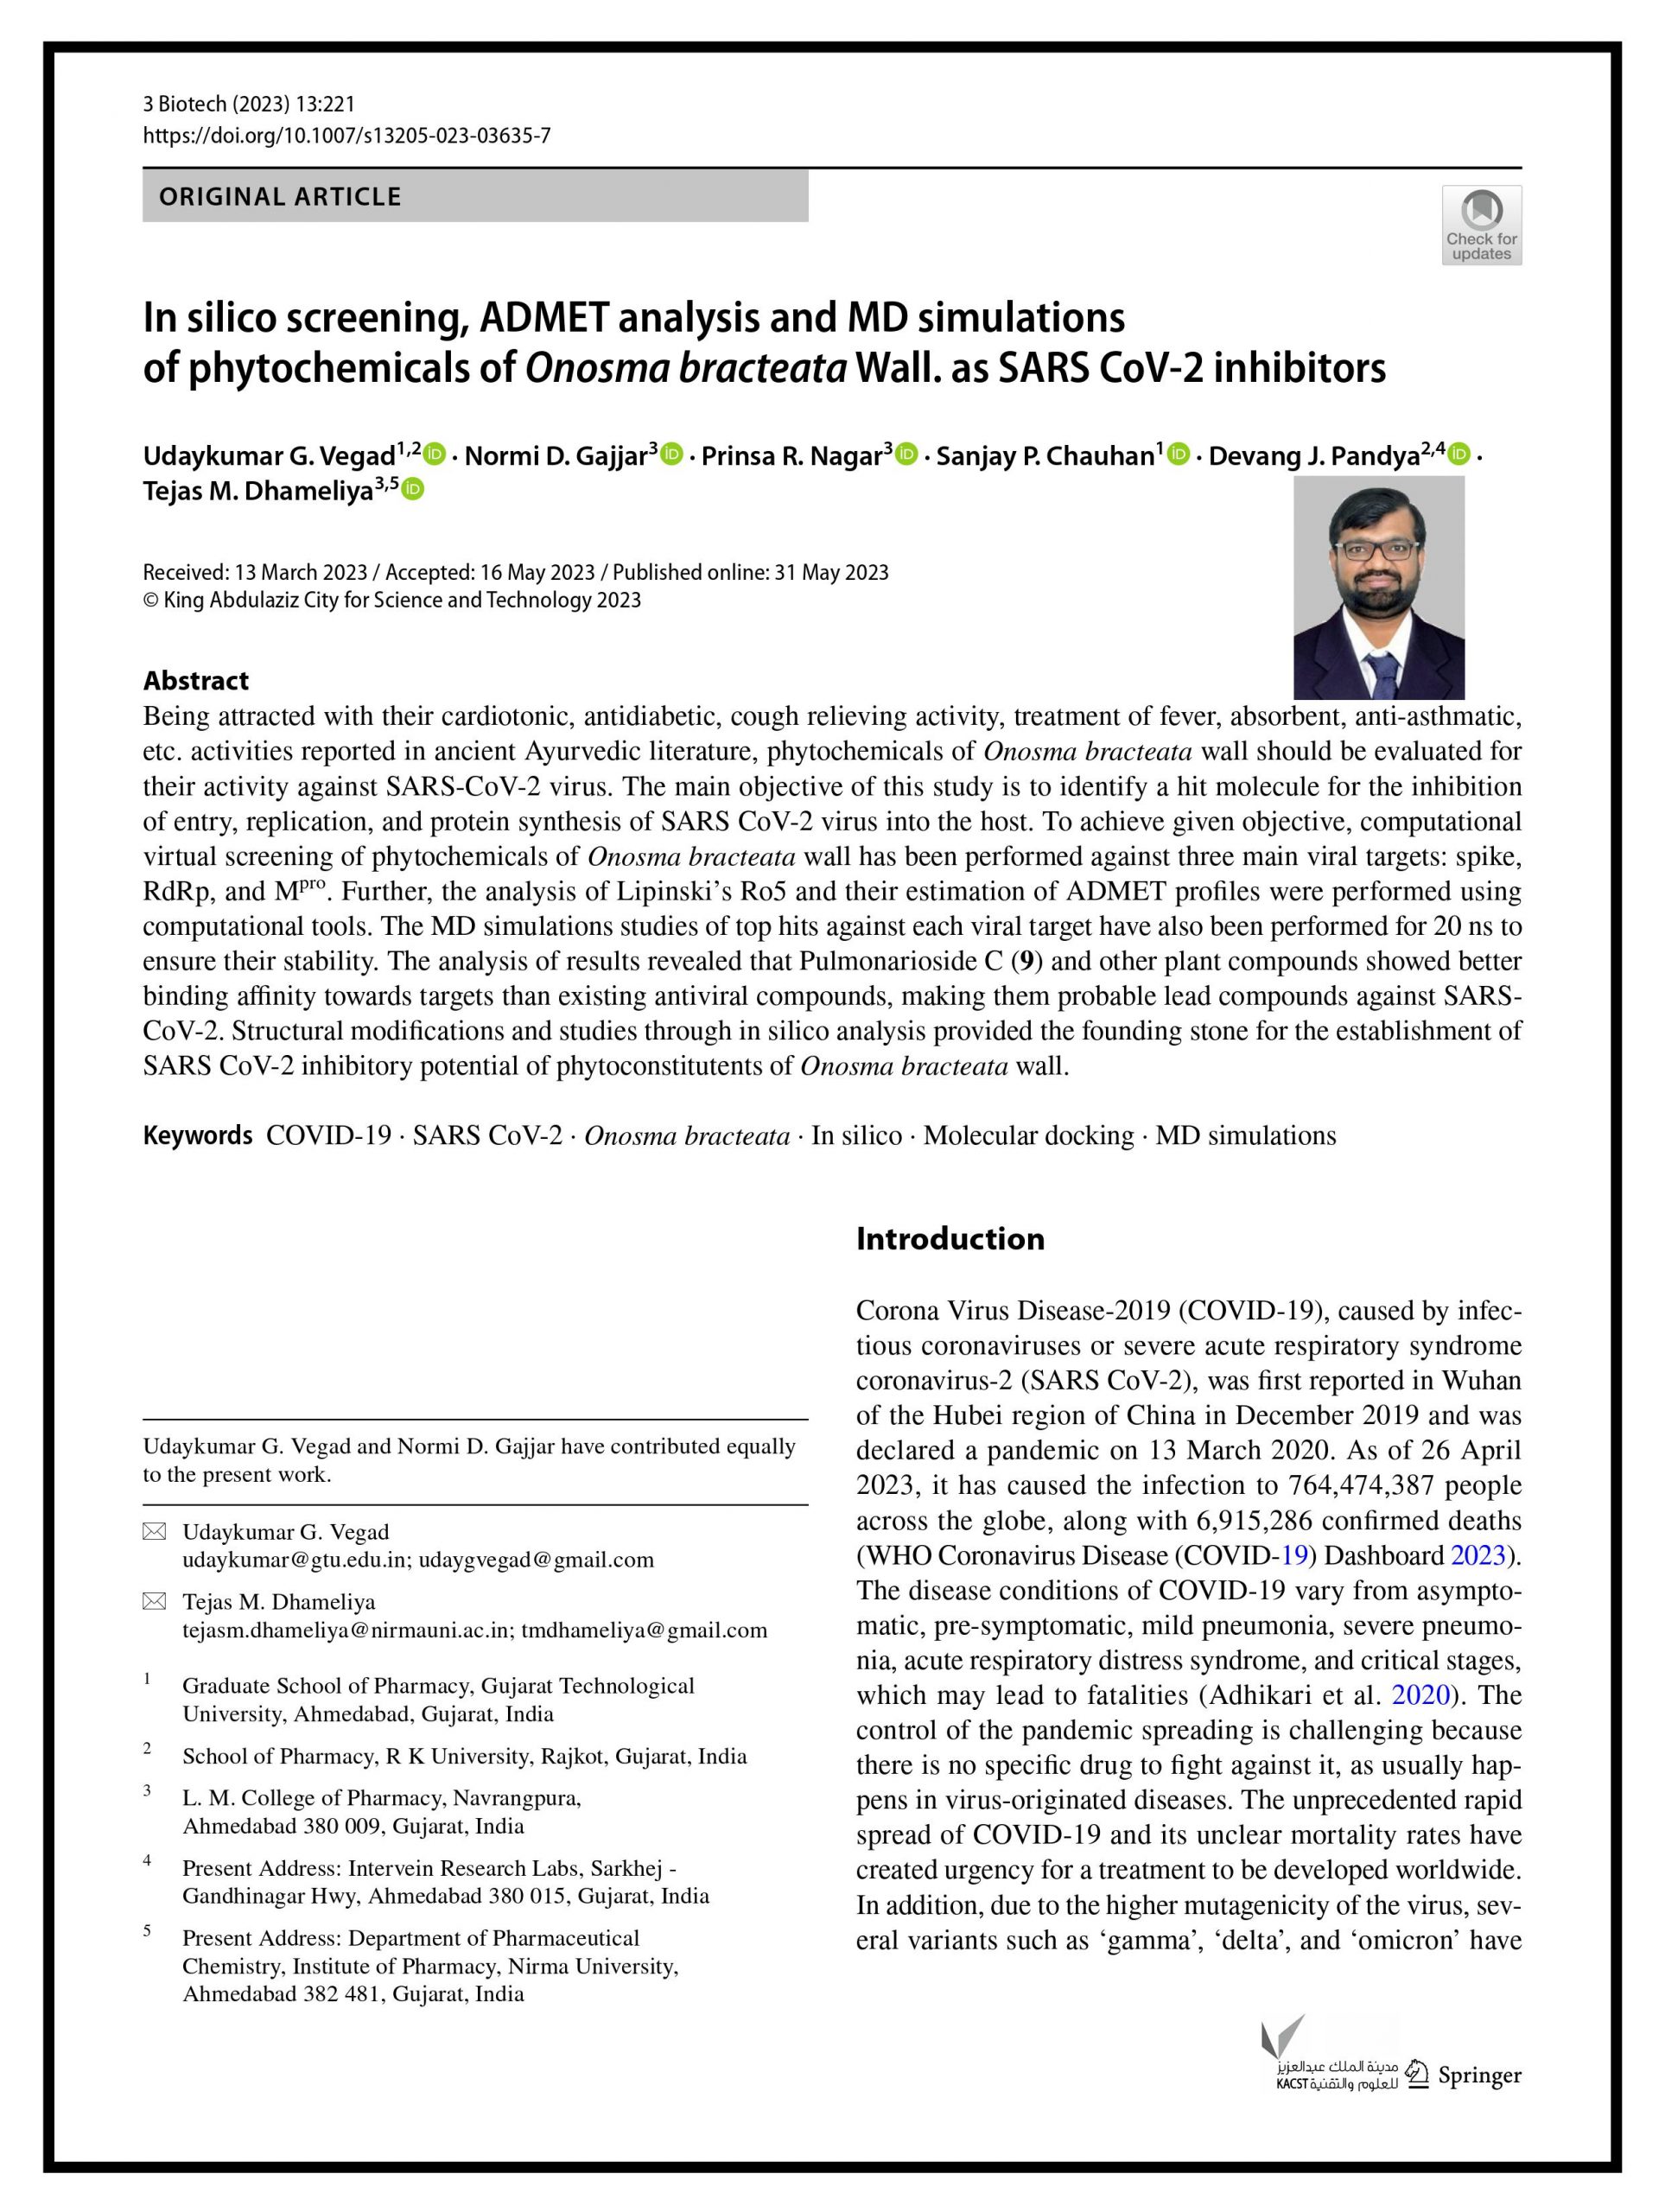 In silico screening, ADMET analysis and MD simulations of phytochemicals of Onosma bracteata Wall. as SARS CoV‑2 inhibitors